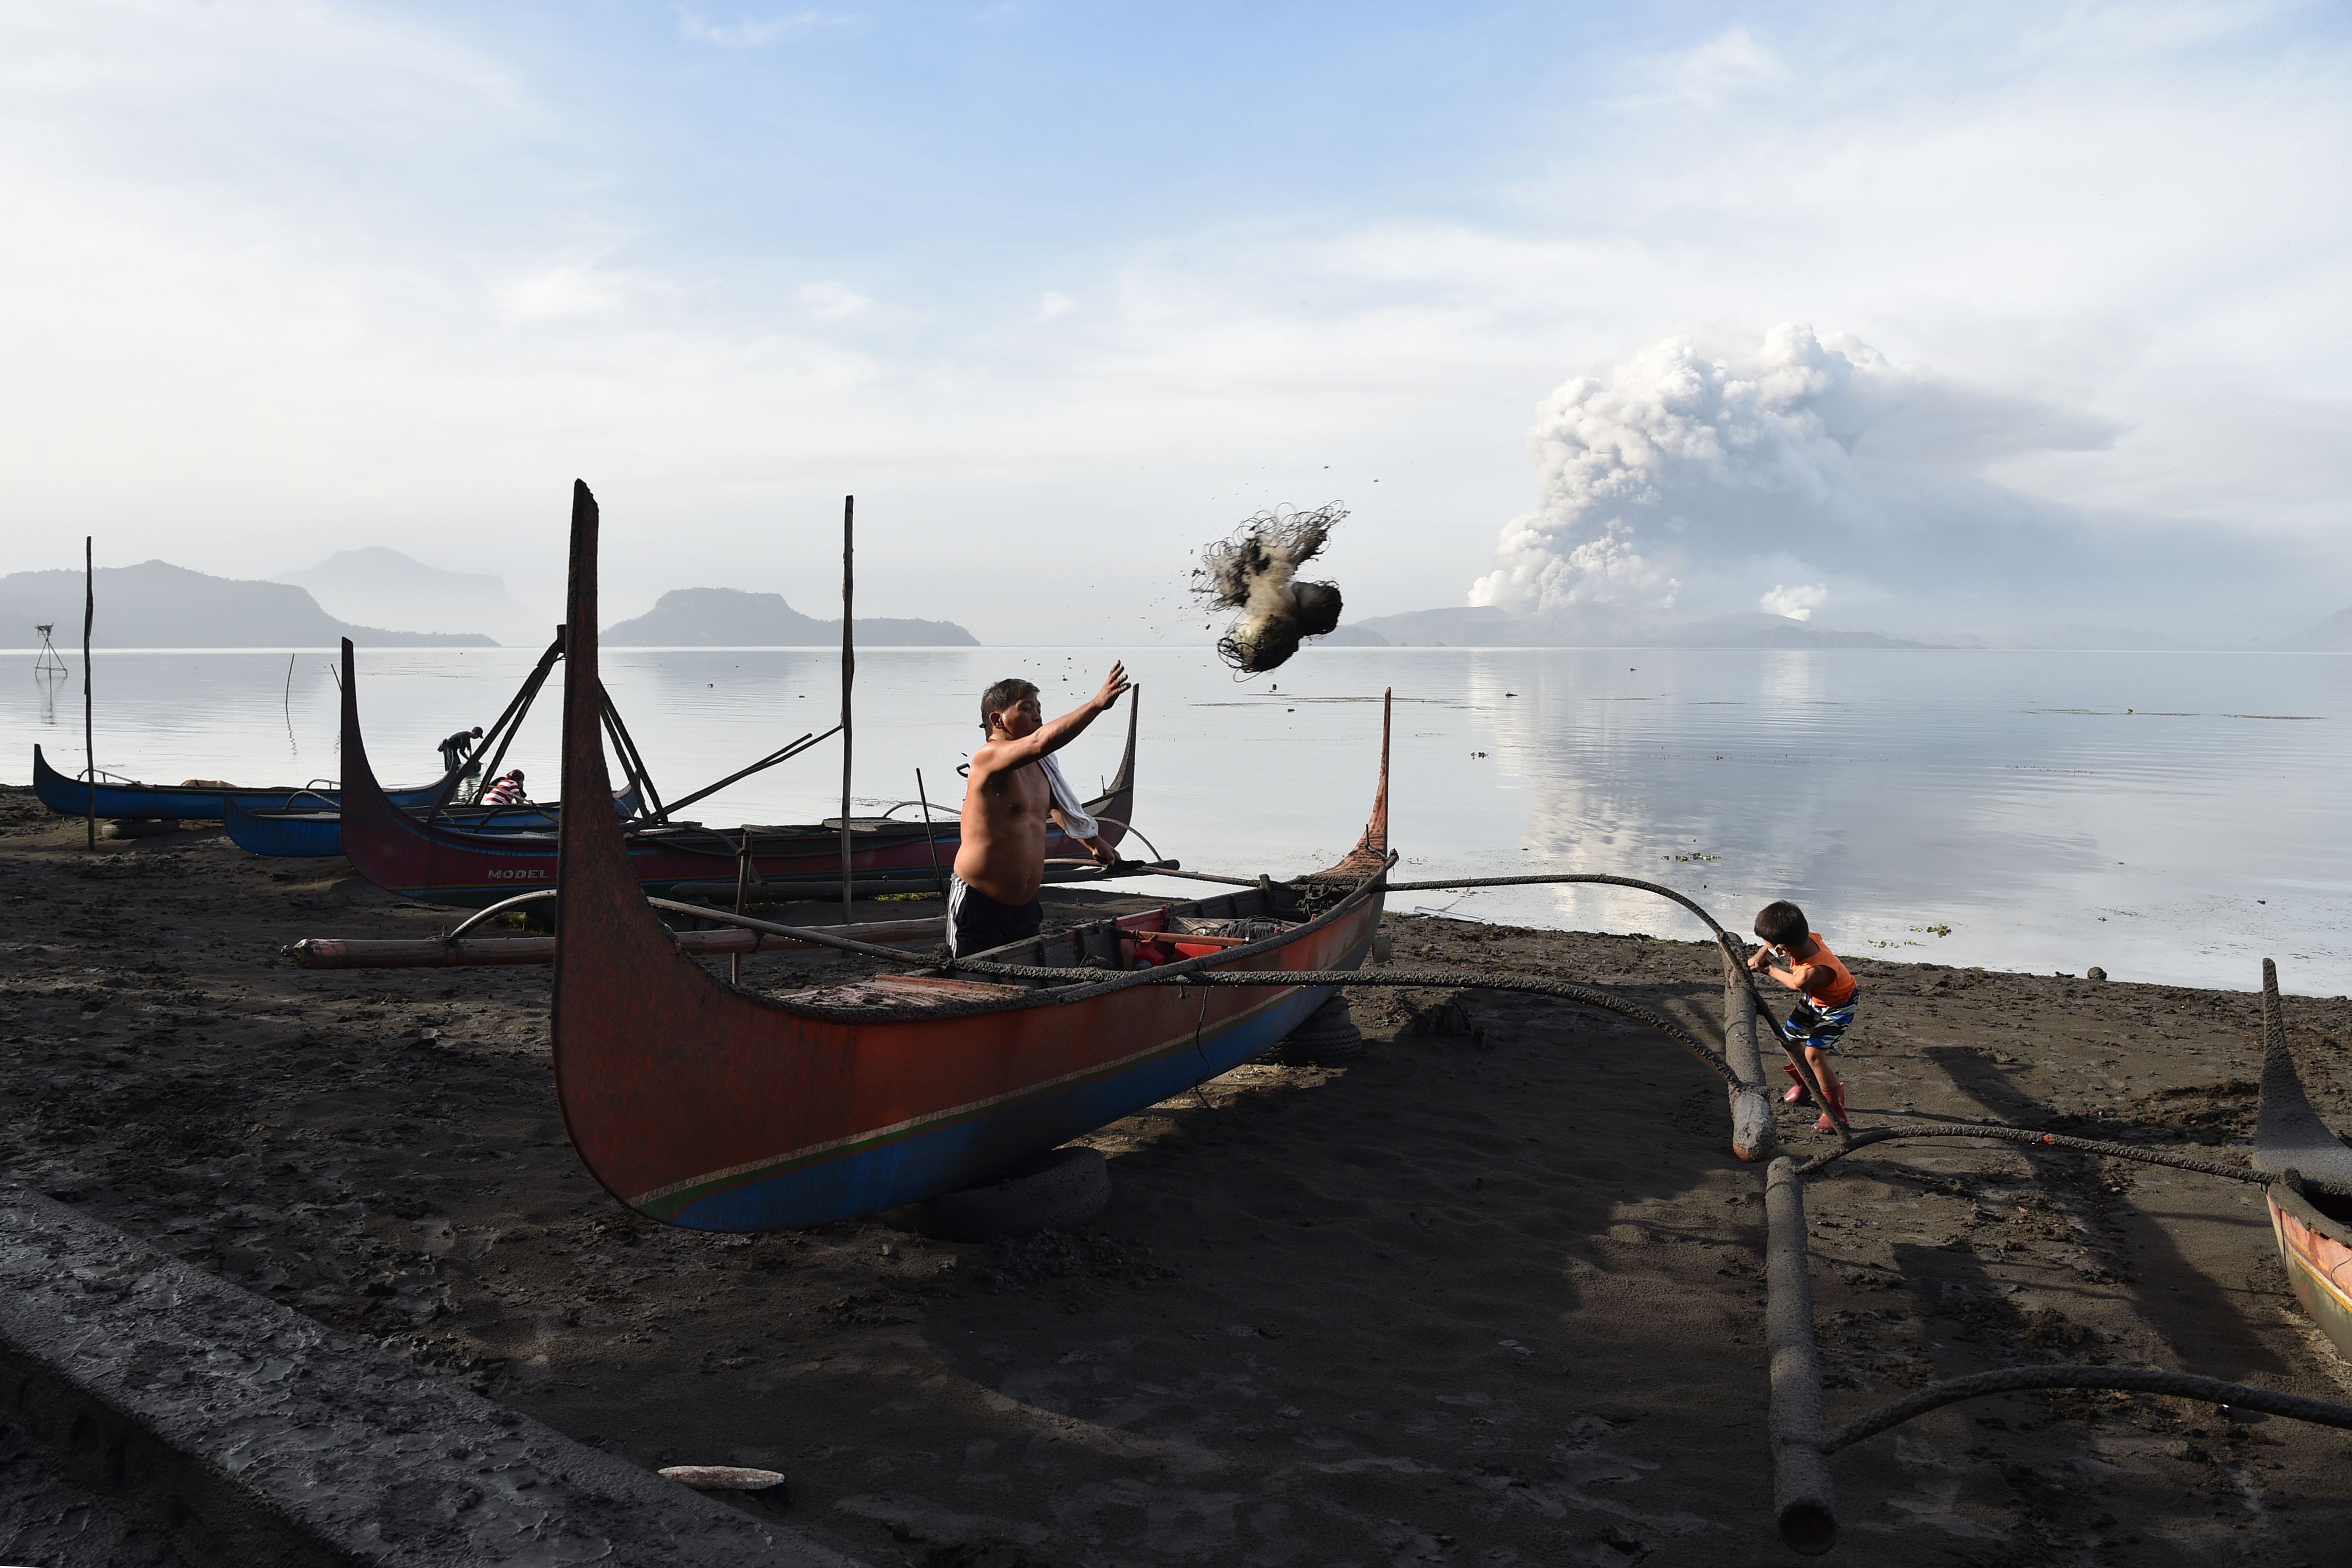  A resident cleans mud and ash from his outrigger canoe after Taal volcano began spewing ash over Tanauan town, Batangas province south of Manila on January 13, 2020.